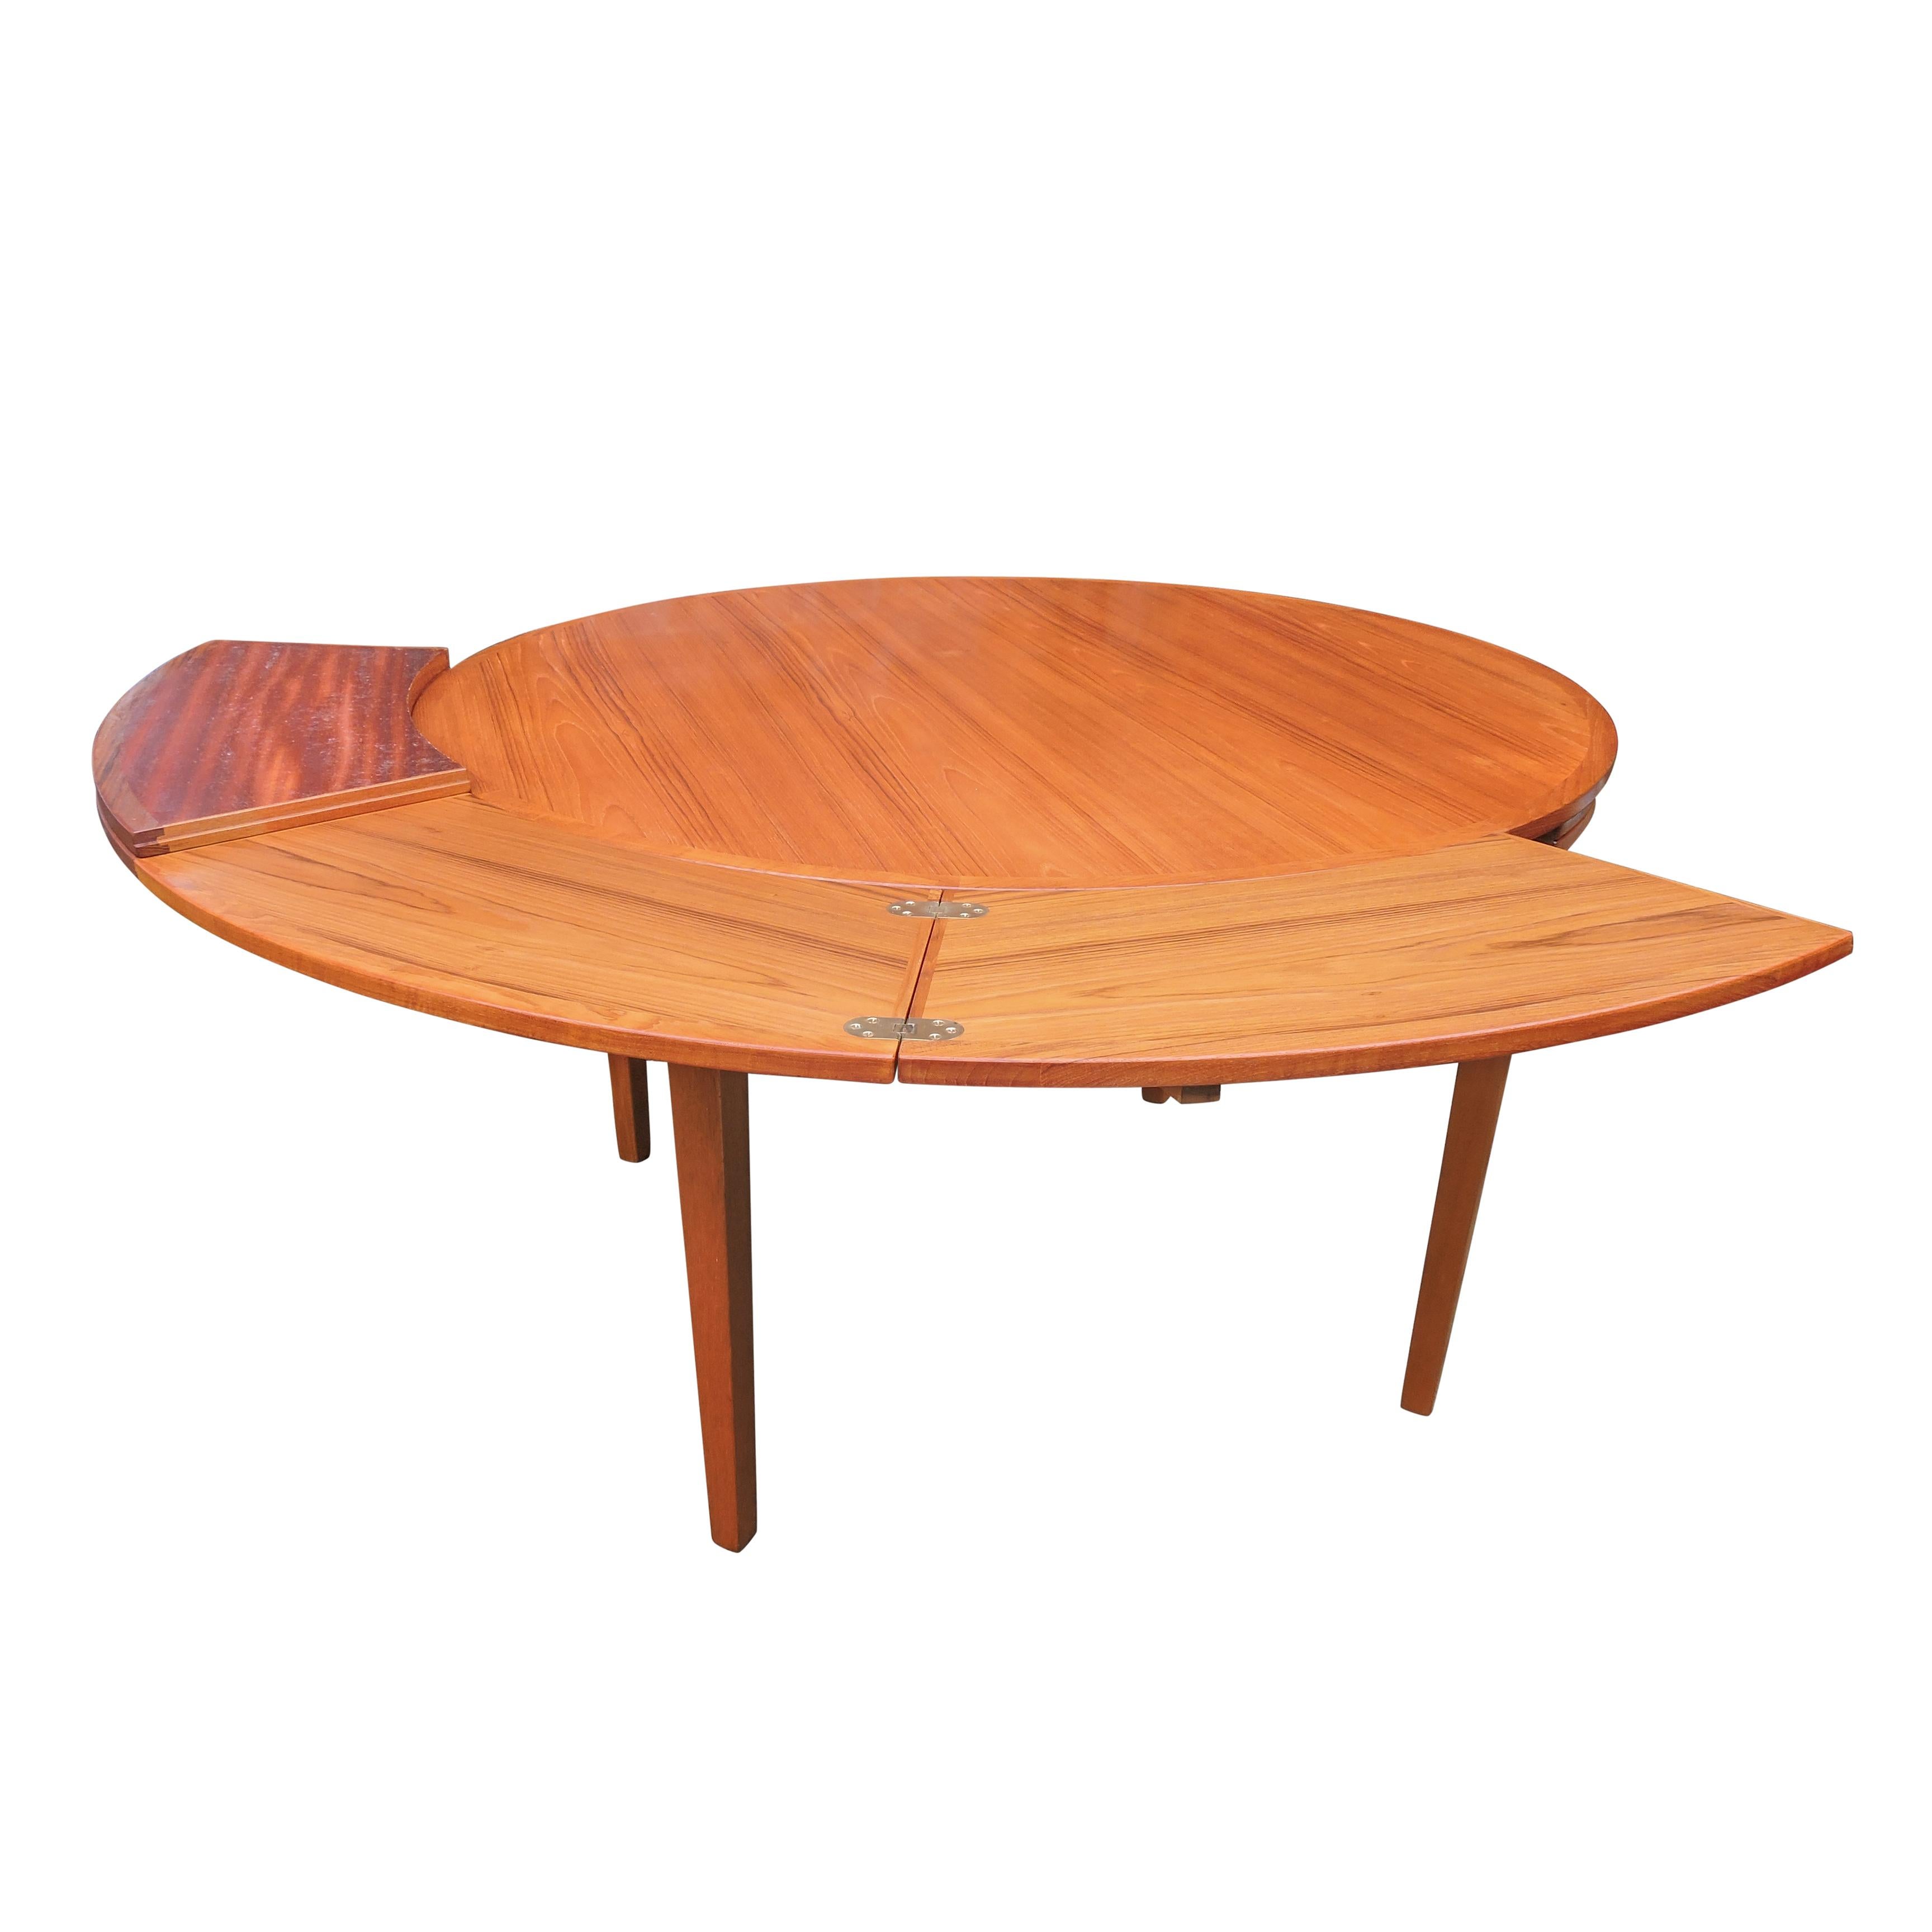 Mid-Century Modern Midcentury Flip-Flap Teak Dining Table from Dyrlund, 1950s For Sale